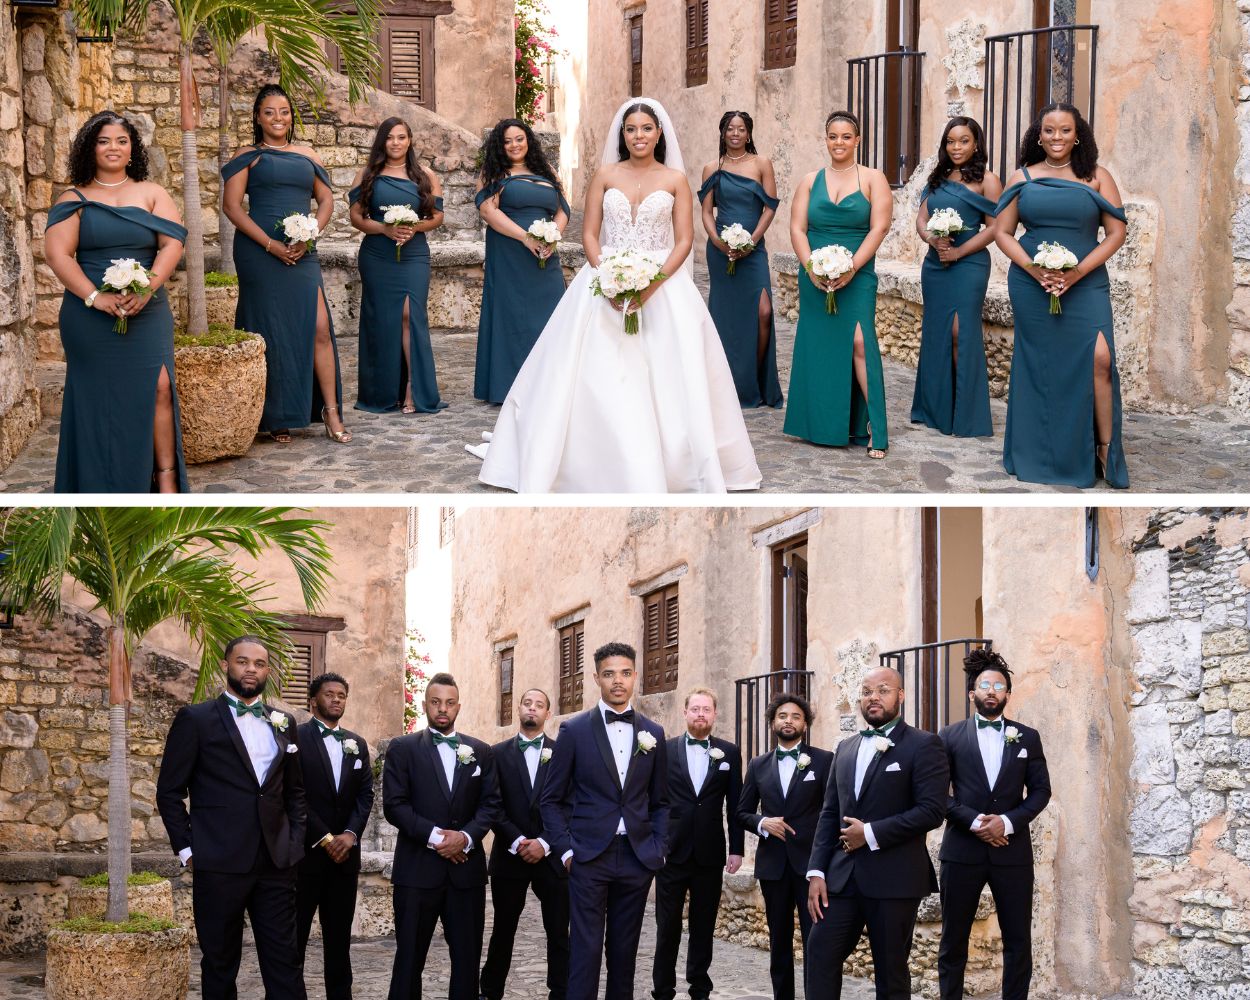 bridal party in emerald green dresses pose with bride in Essence of Australia gown; groom and groomsmen pose in black tuxes with green and black bowties